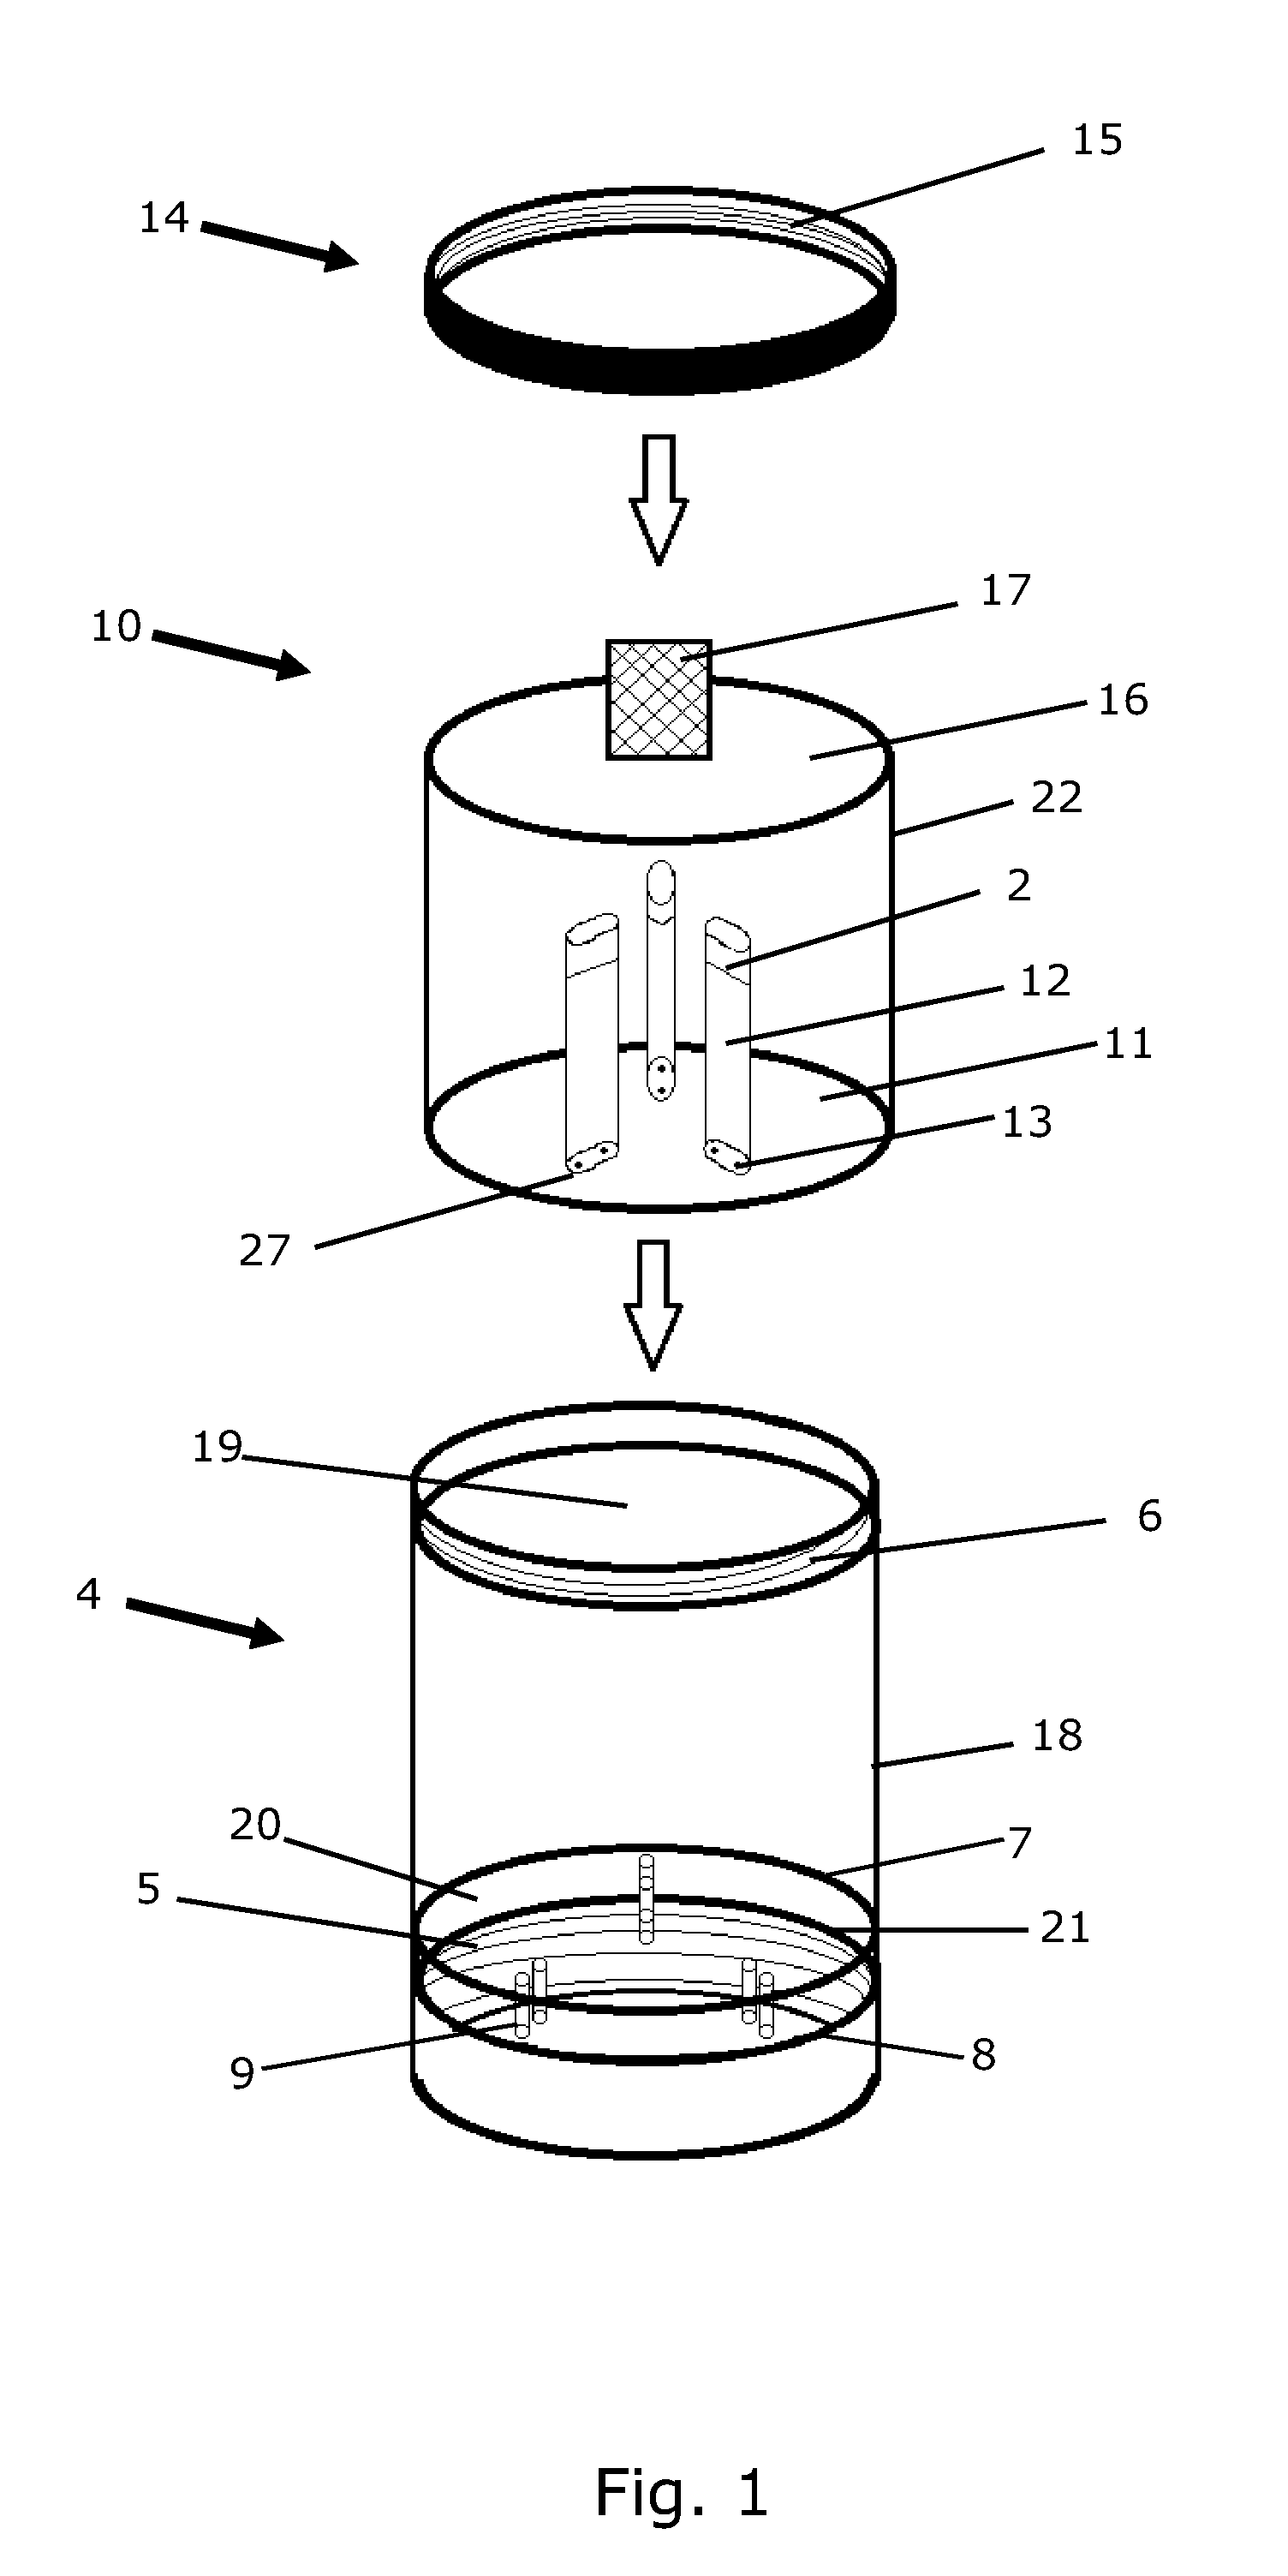 Dispensing unit for dispensing preservation fluid into a tissue sample container